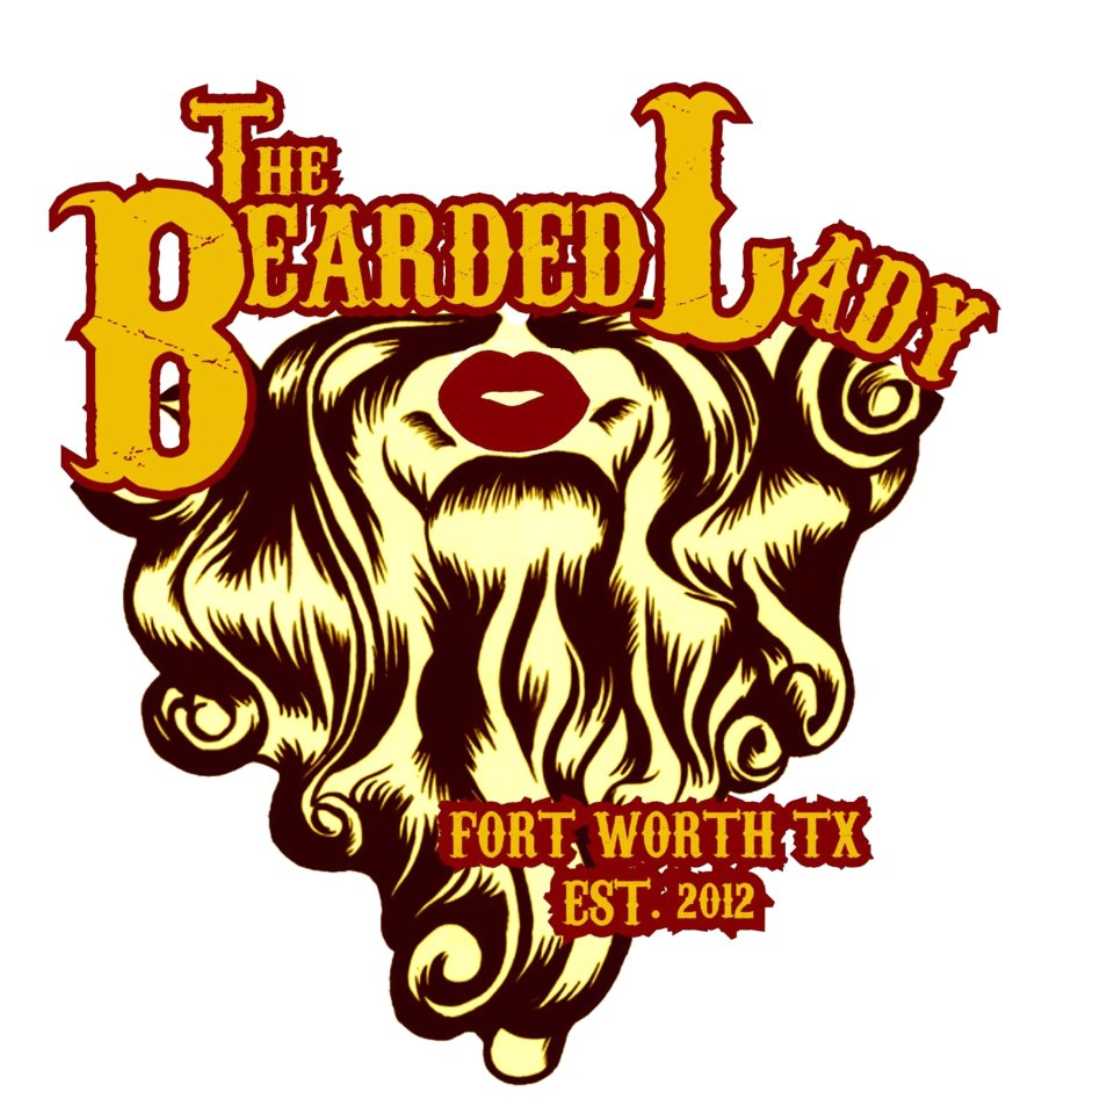 The Bearded Lady is a bar that will serve food until 2 a.m., a first for Magnolia.